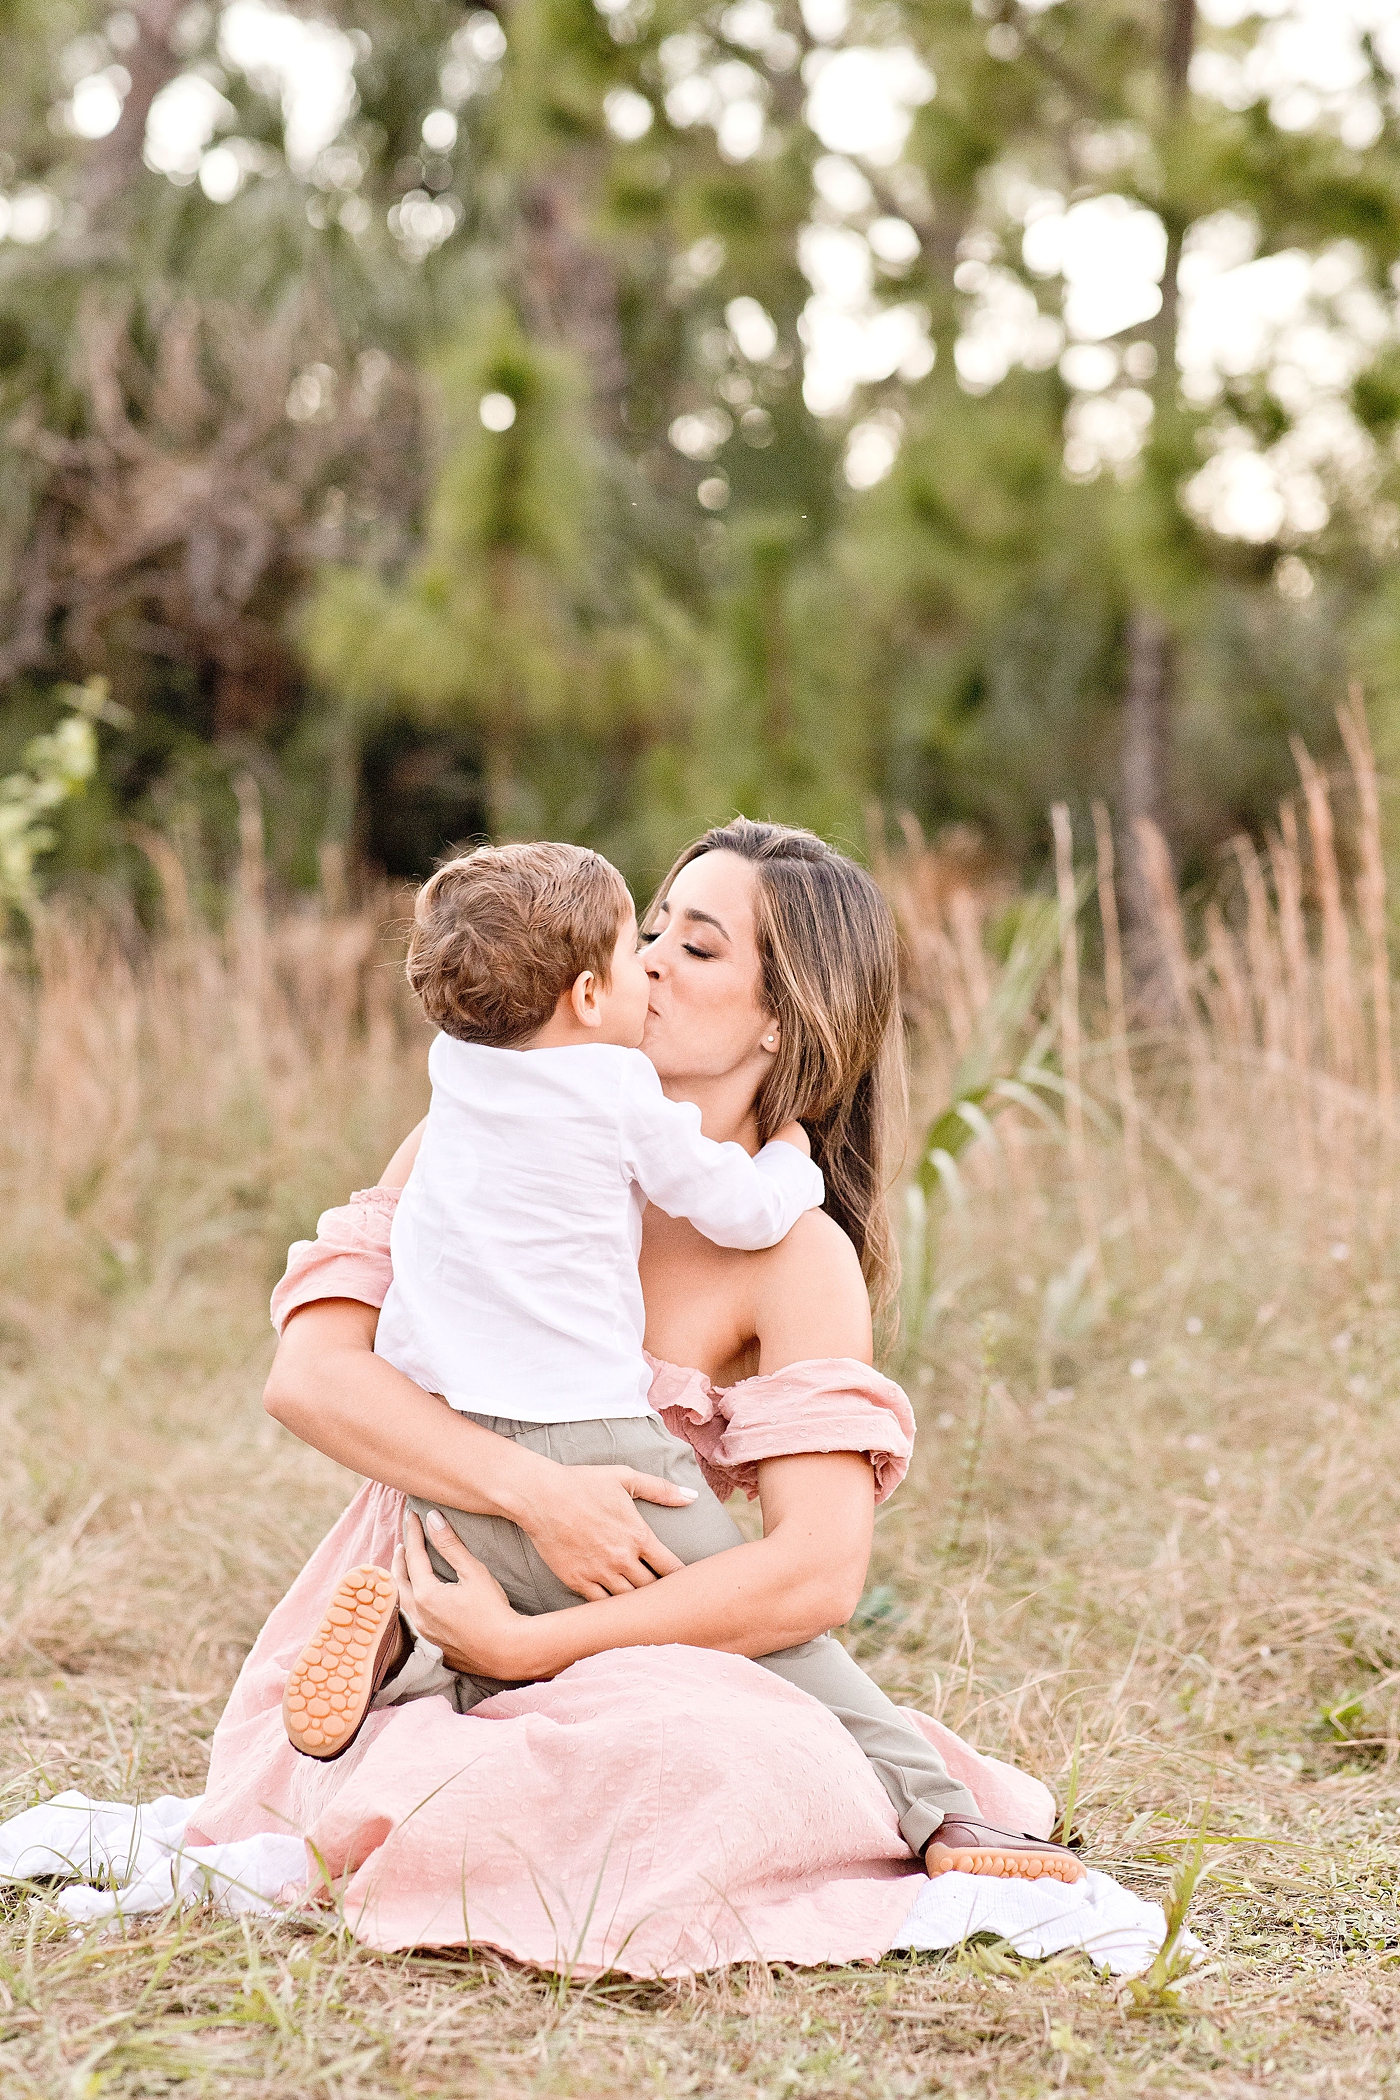 Mom kisses son during Miami photo session. Photo by Ivanna Vidal Photography.